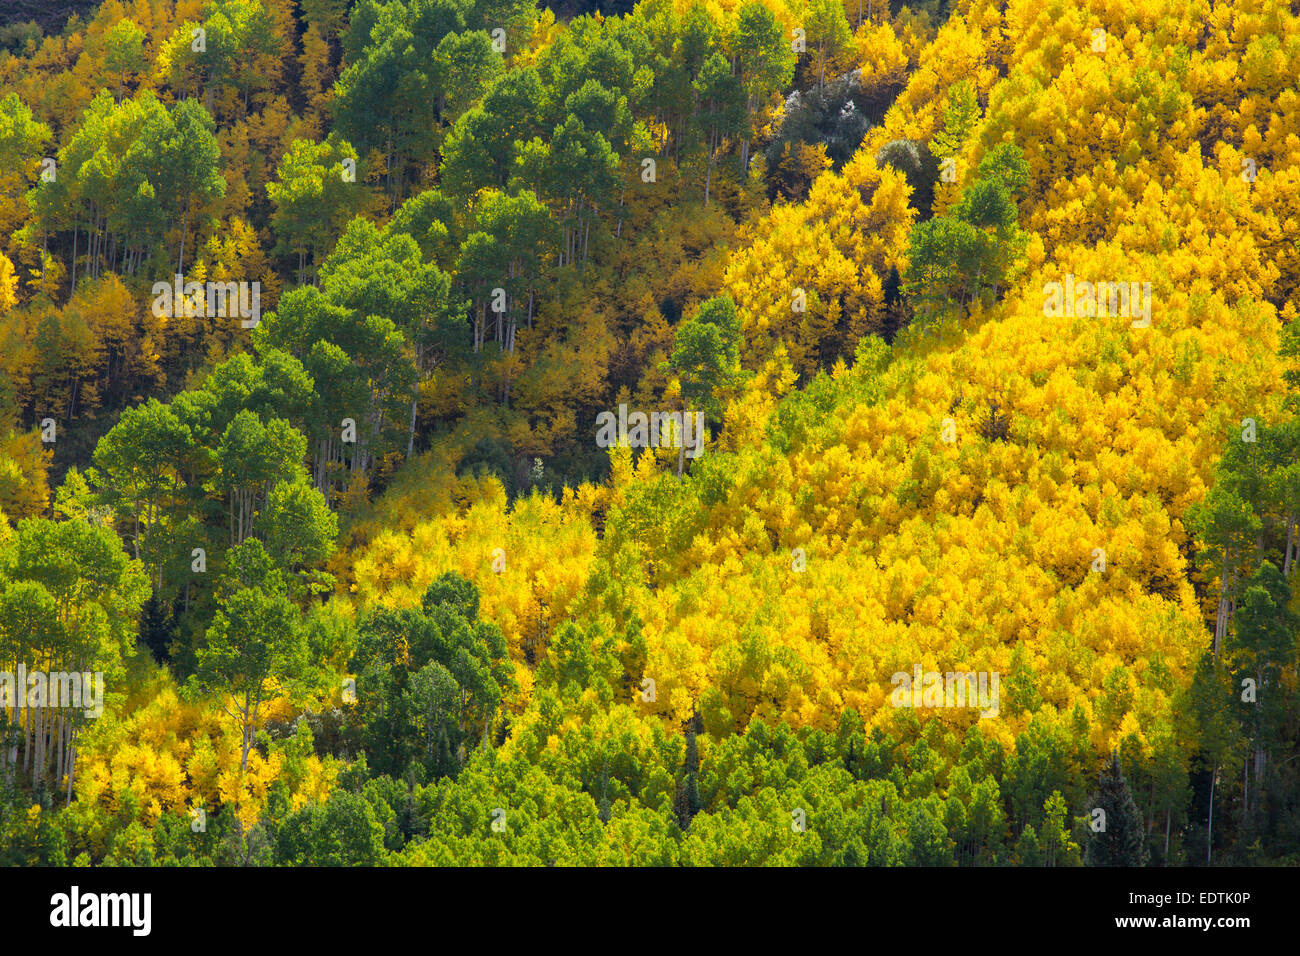 Bright yellow fall Aspen trees in the Rocky Mountains of Colorado Stock Photo